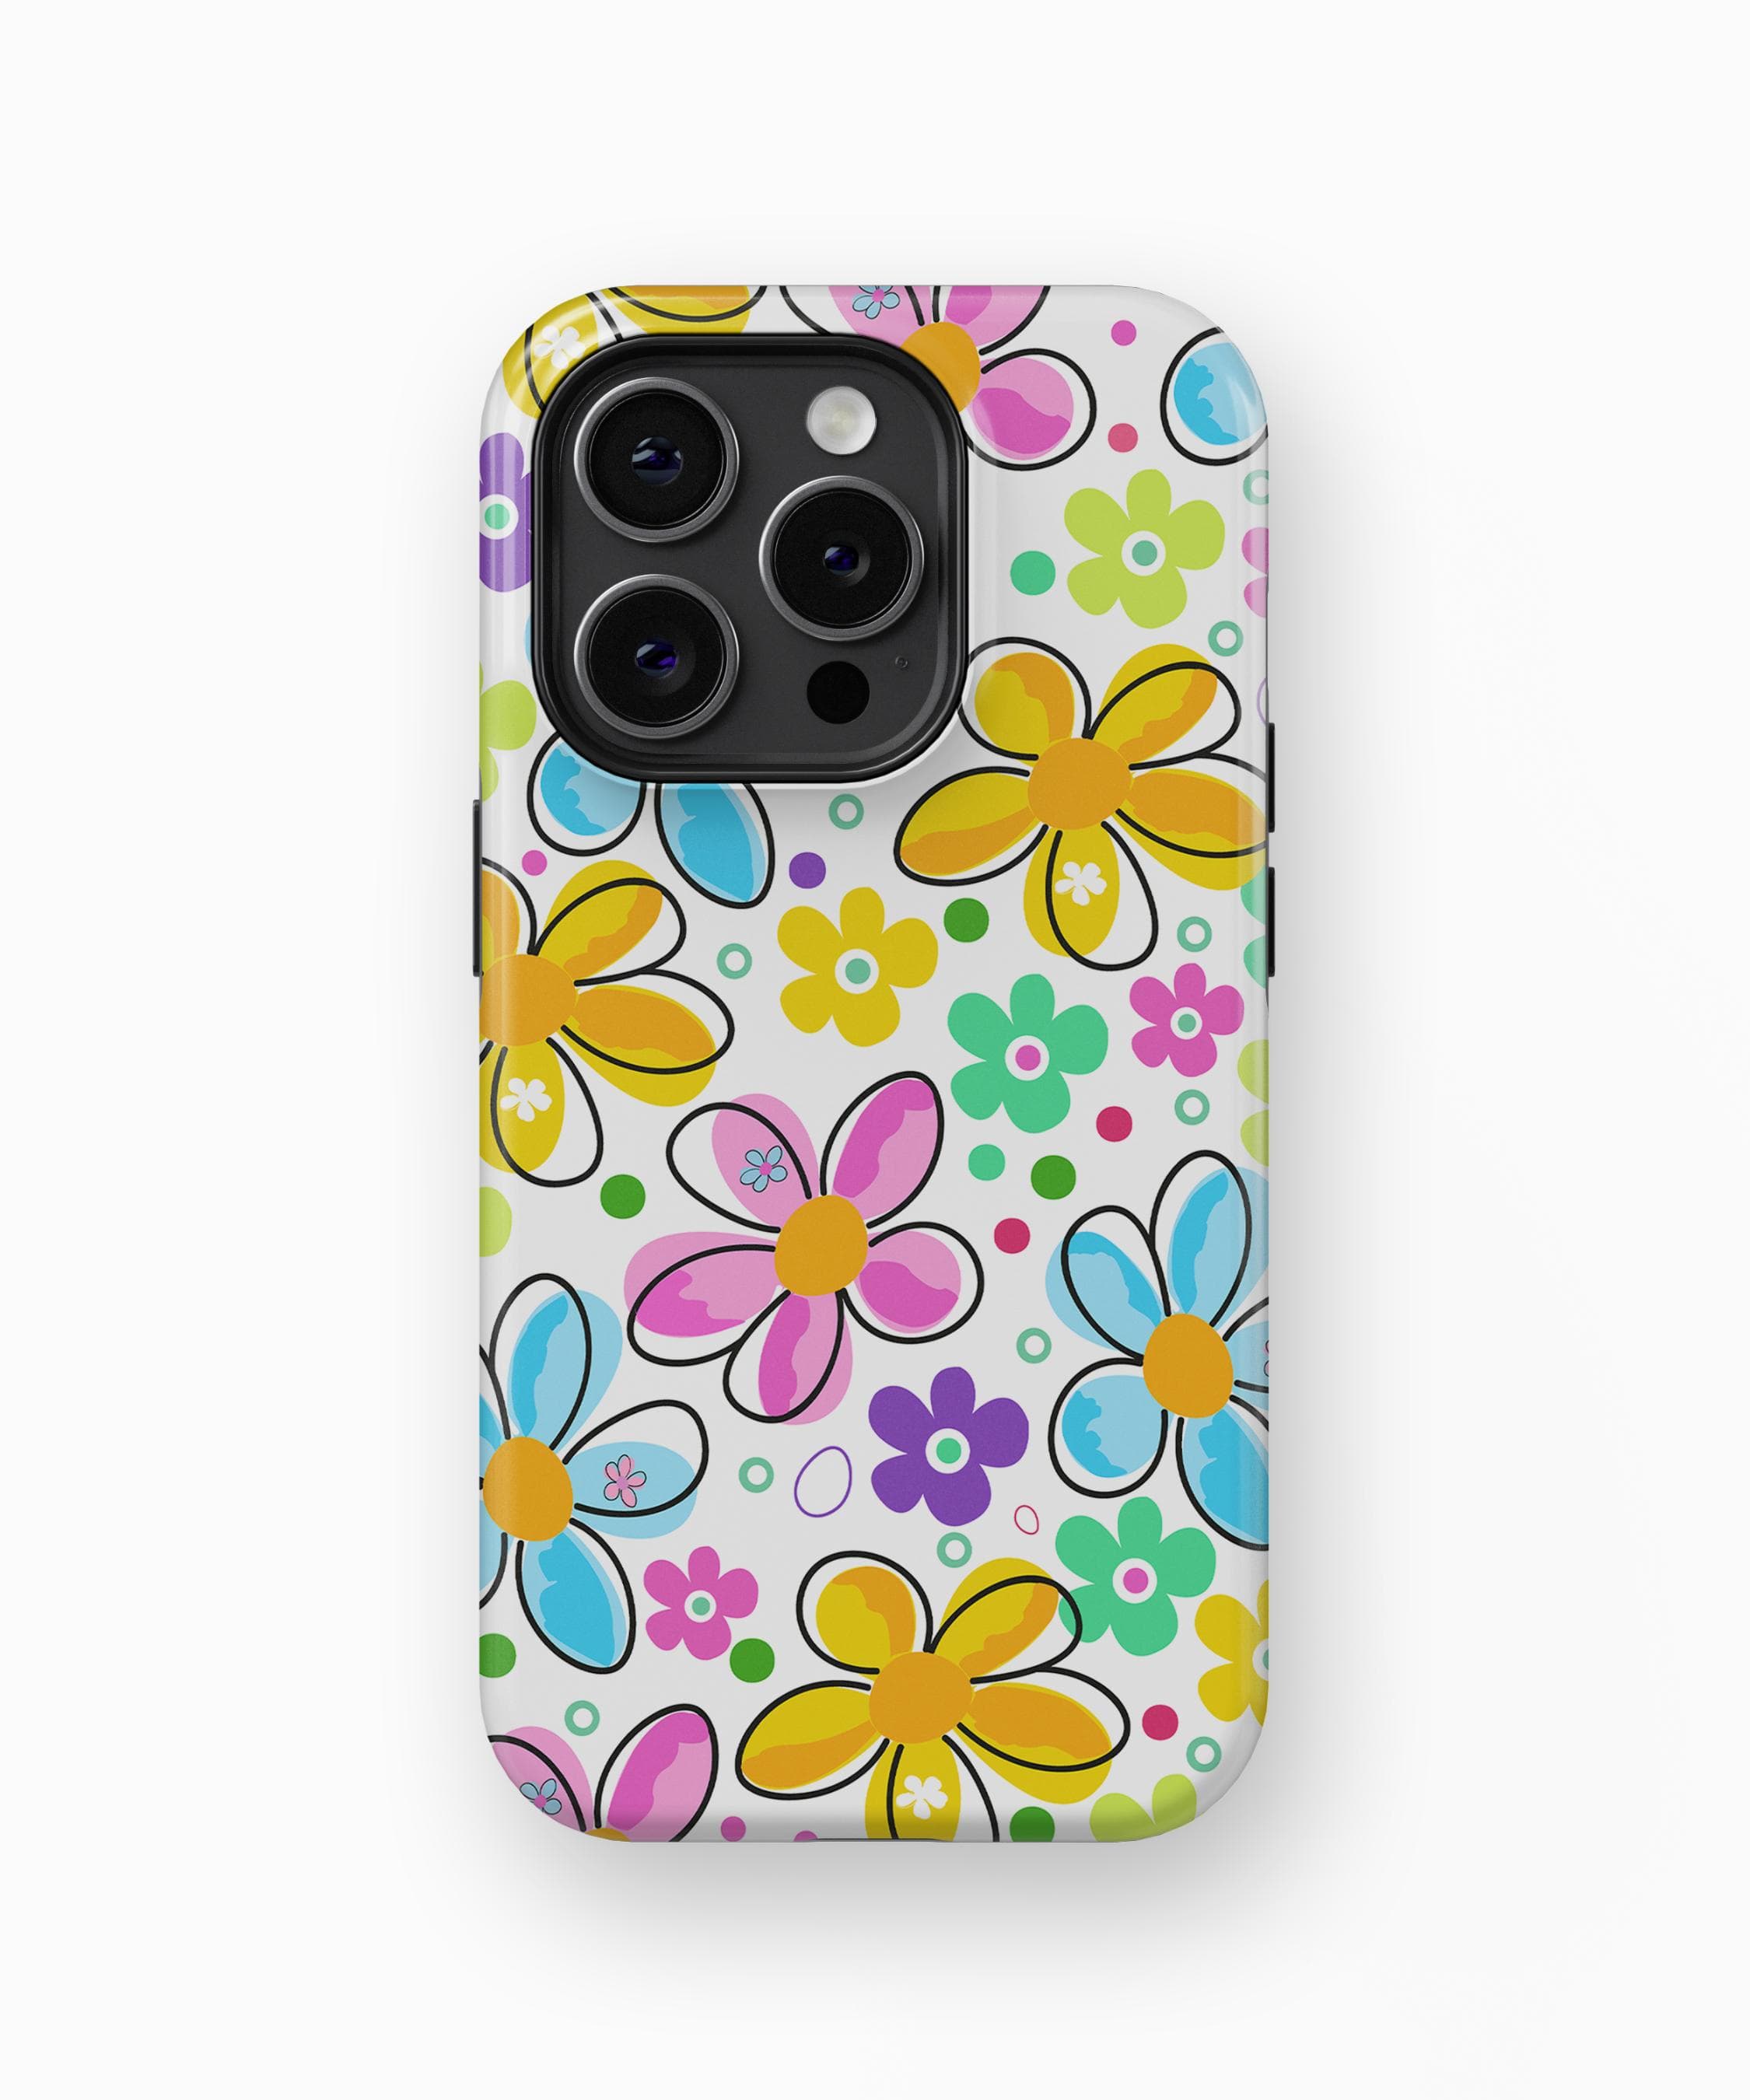 iPhone Case Colorful Doodle Spring